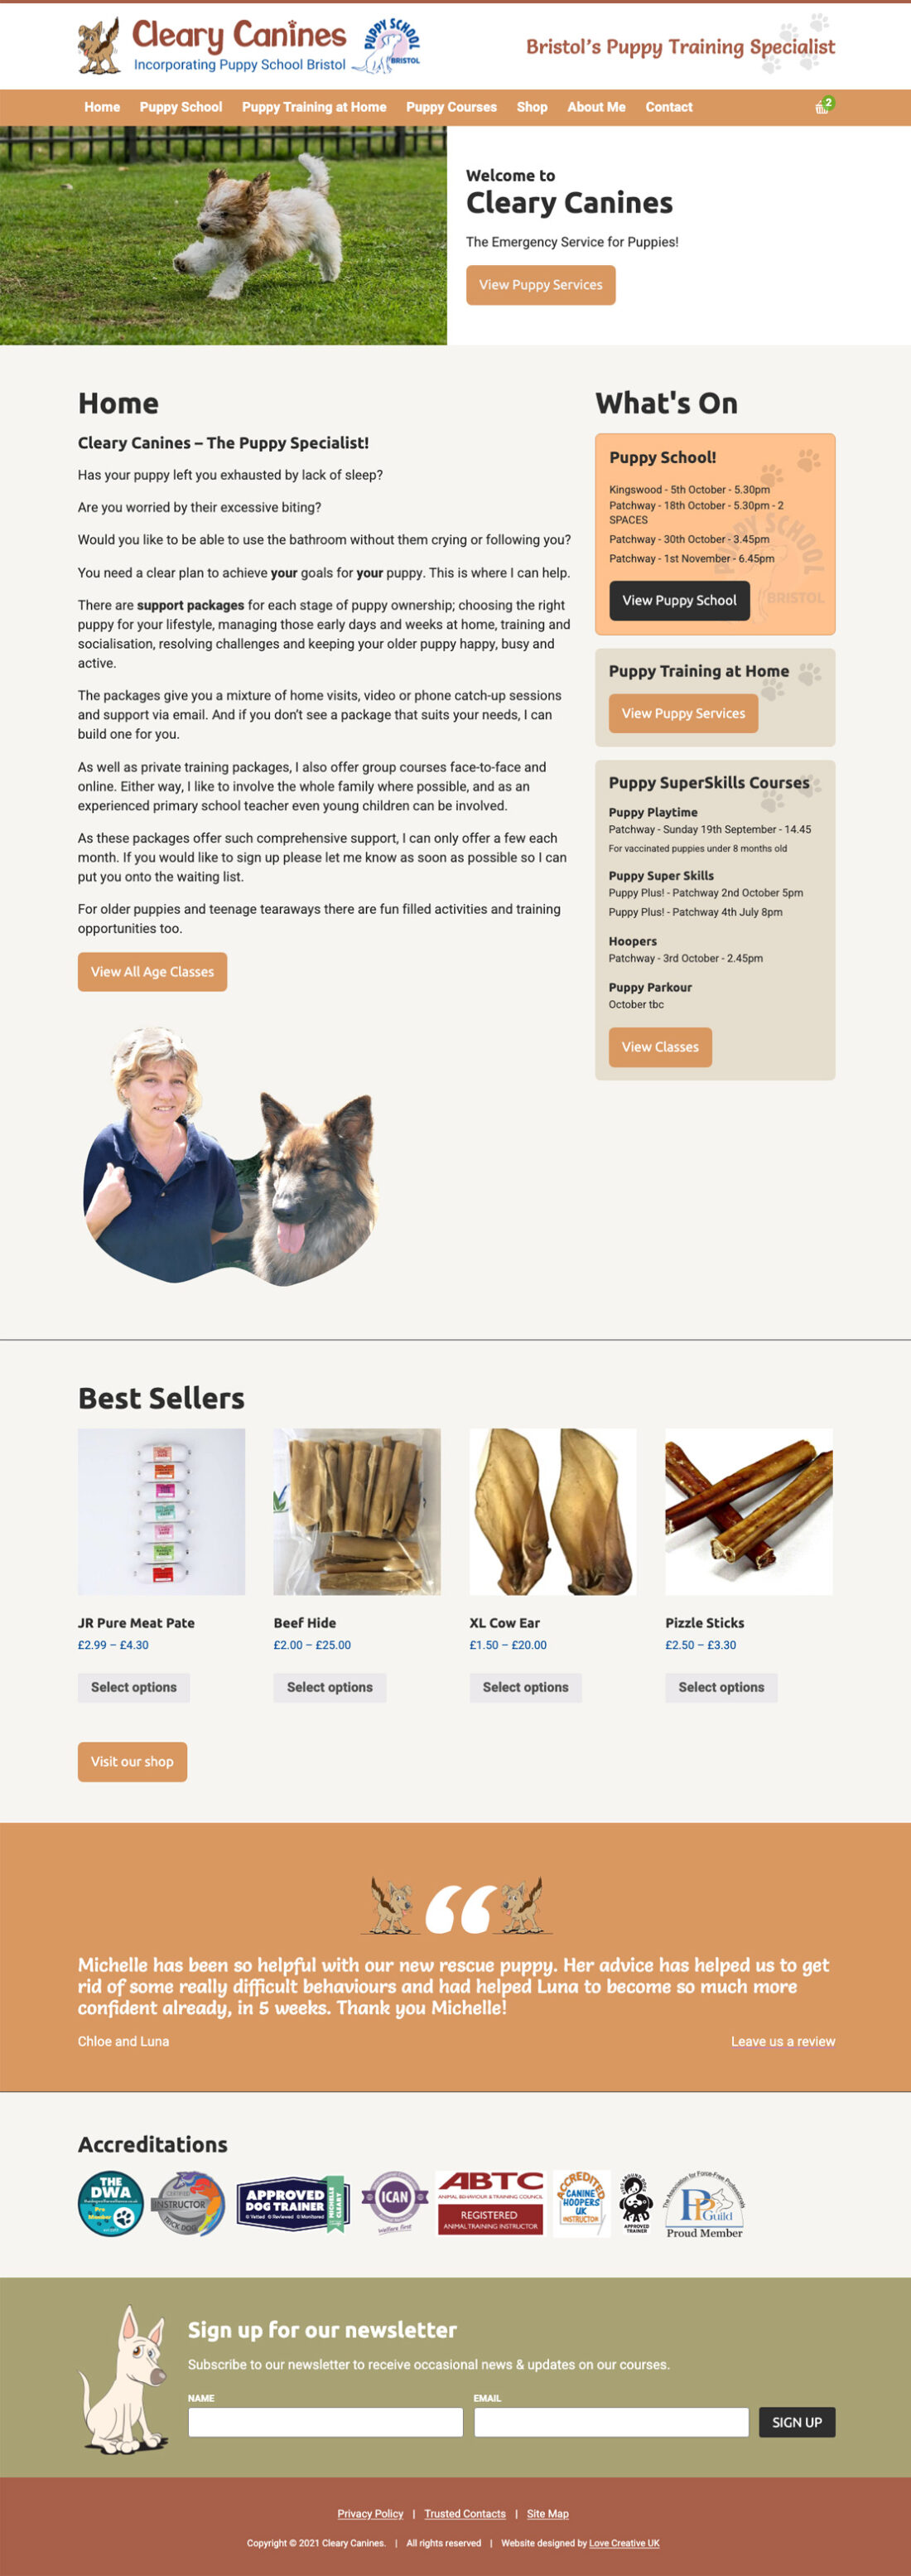 Cleary Canines - Dog training Website home page design